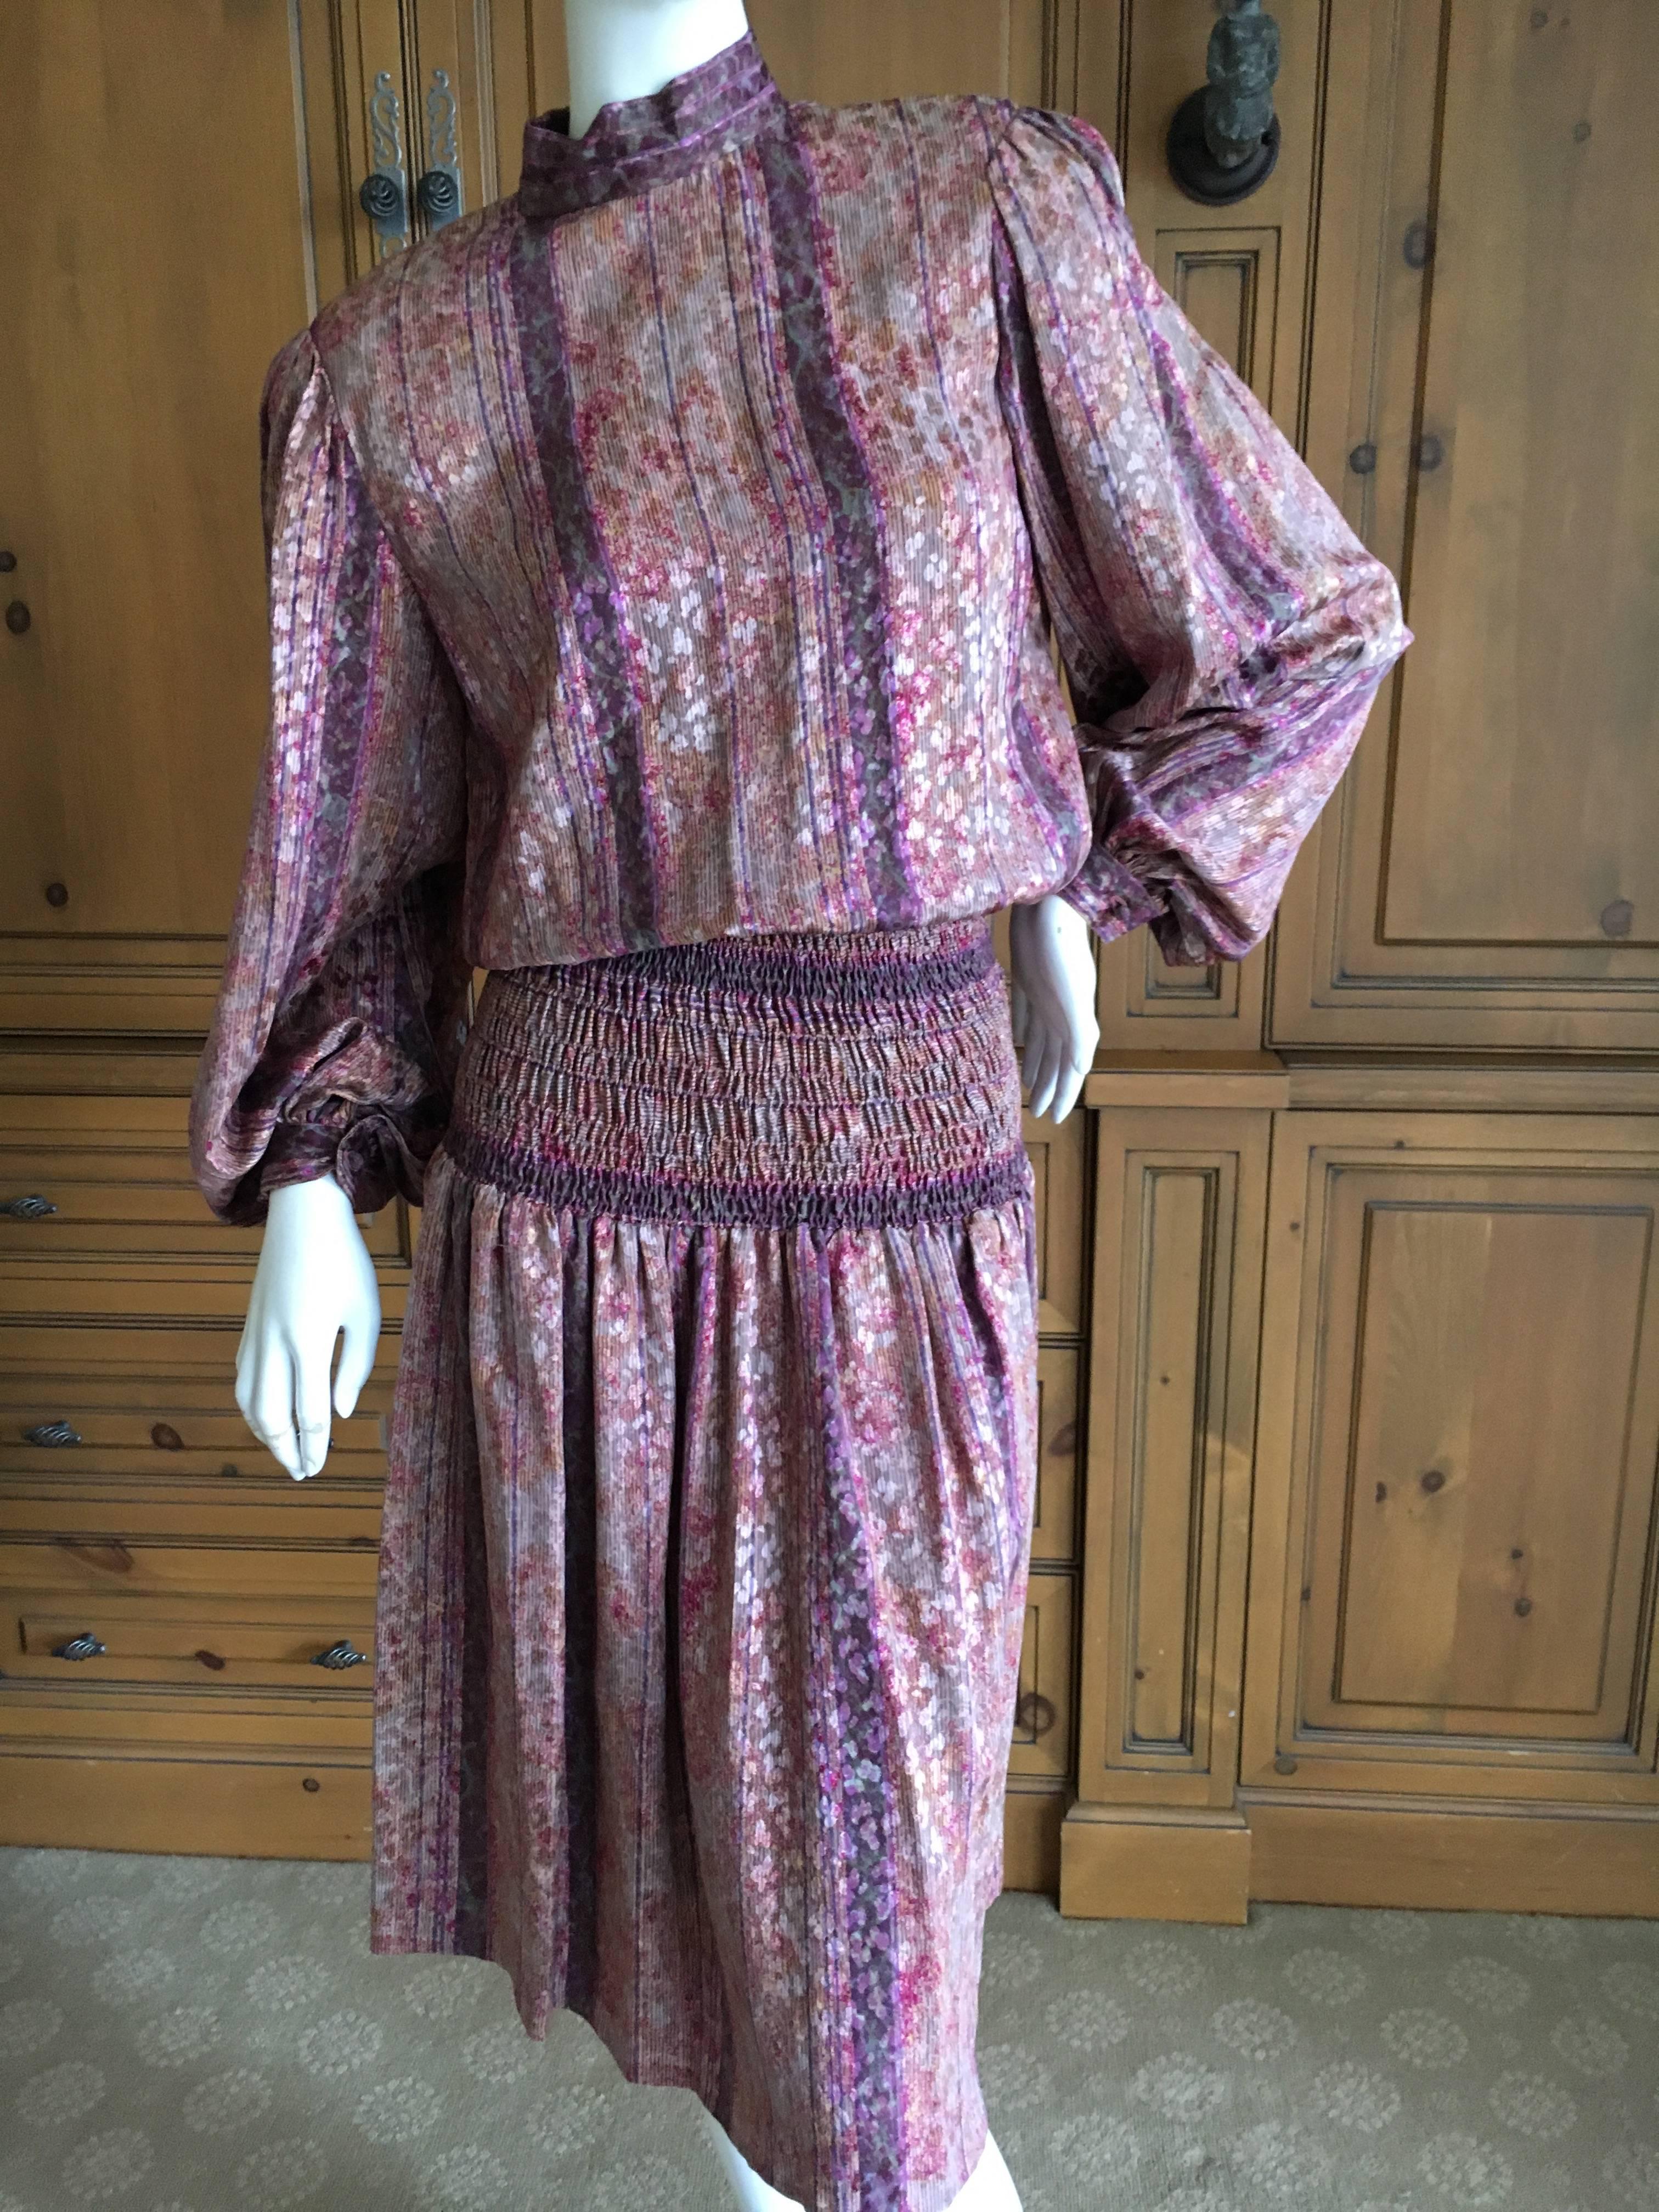 Galanos for Martha Park Avenue Silk Drop Waist Peasant Dress.
This is so much prettier in person, on a leopard pattern silk.
Finished to perfection inside and out.
Size Small
Bust 40